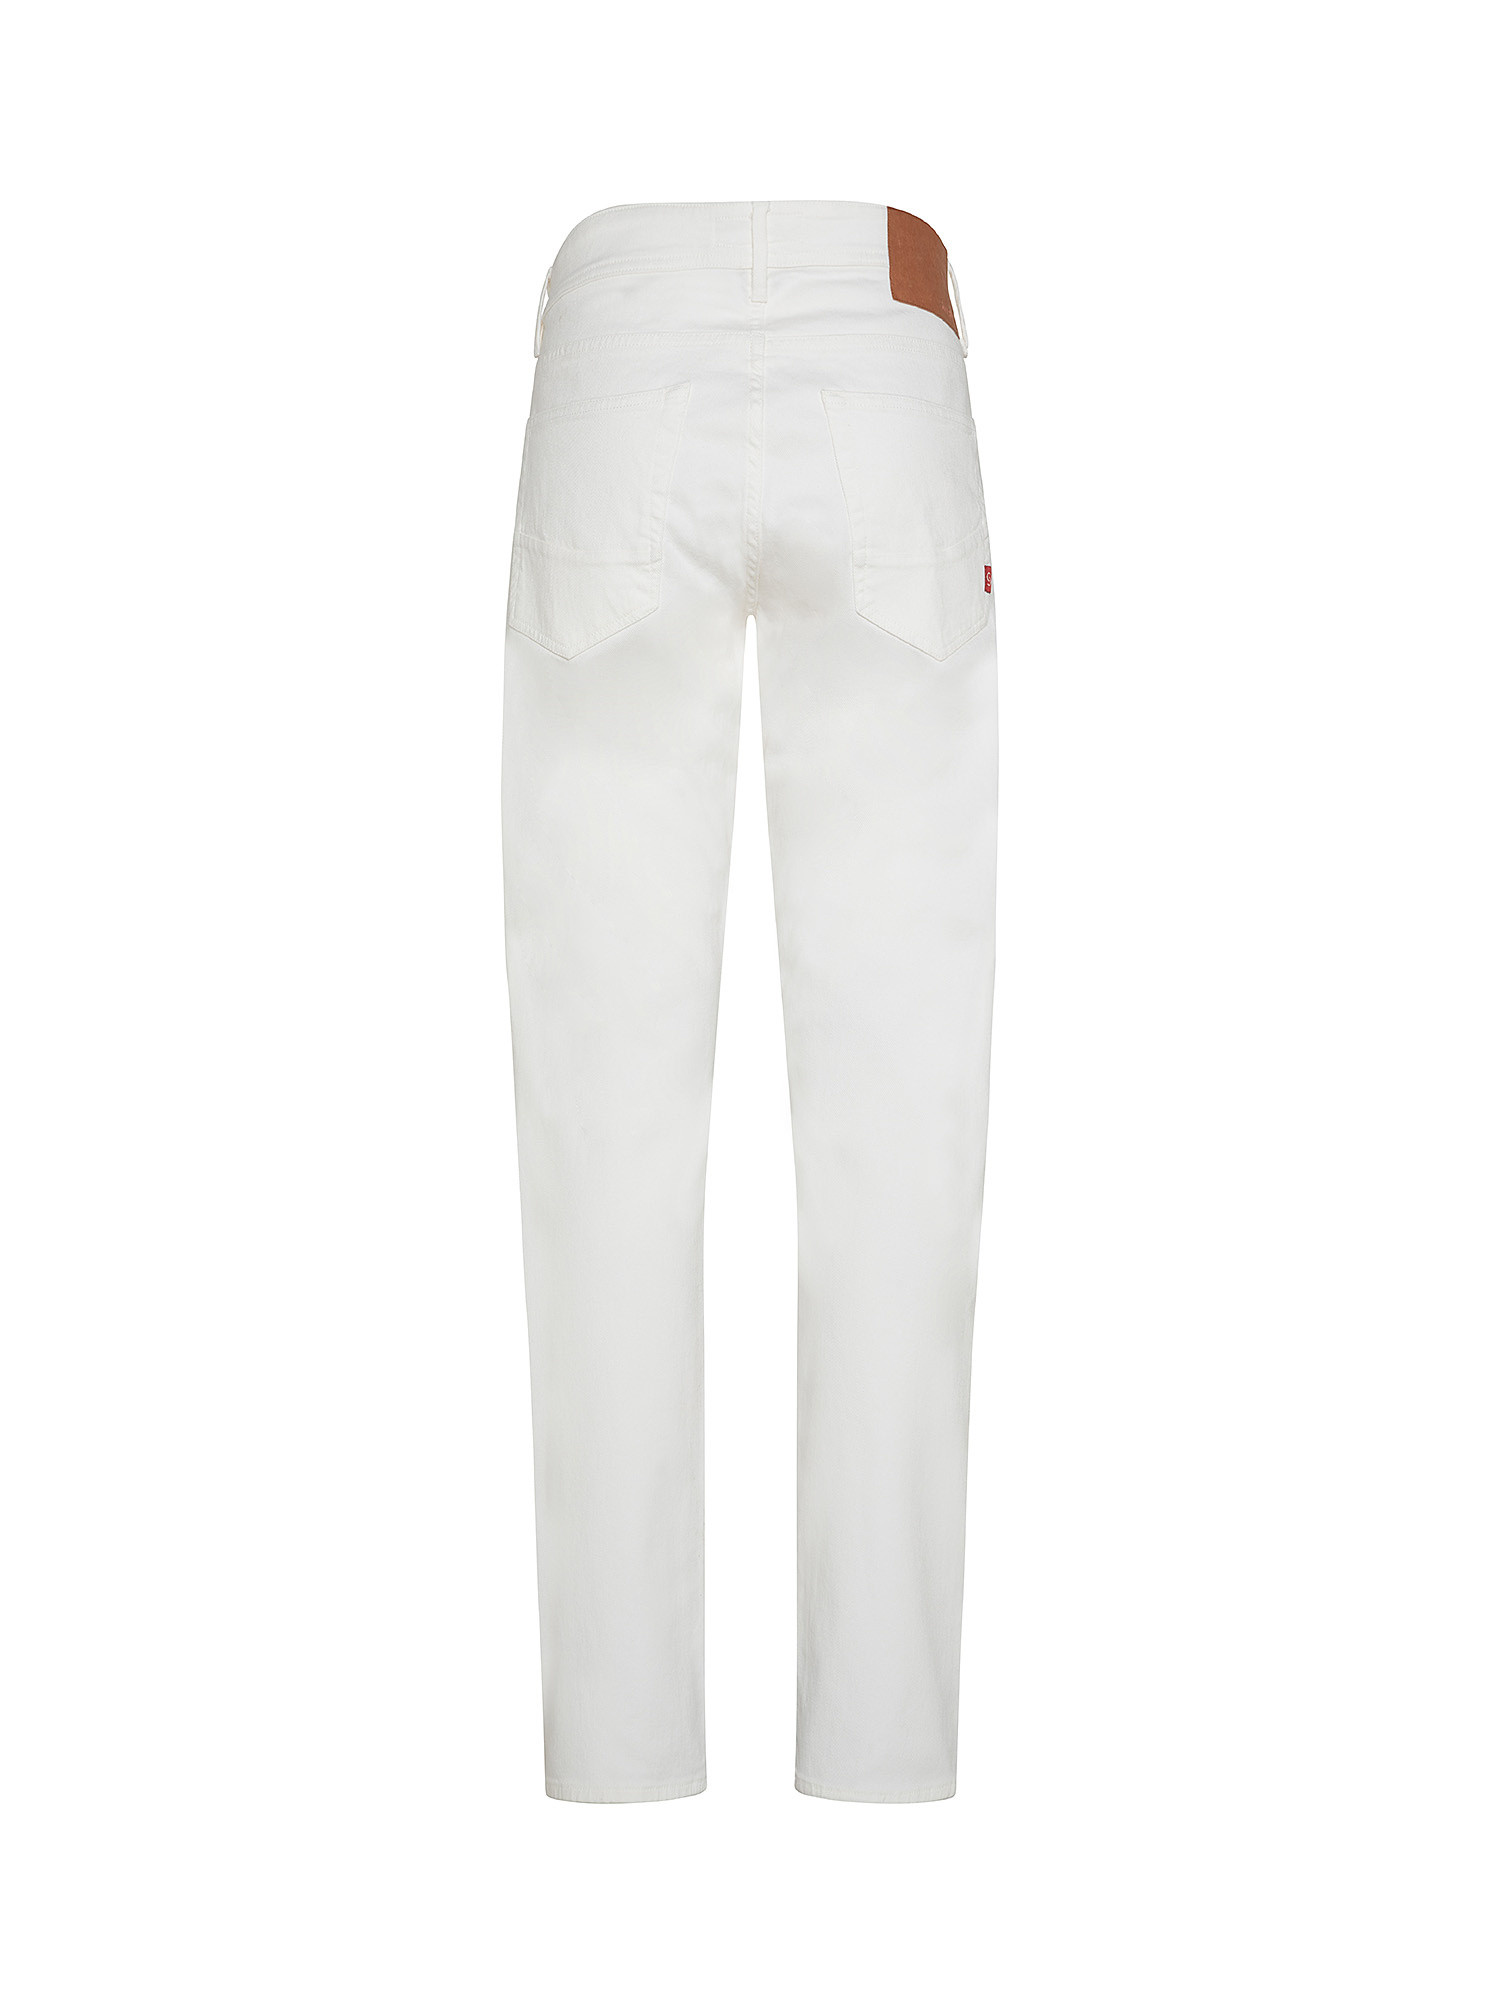 Denim trousers, White, large image number 1